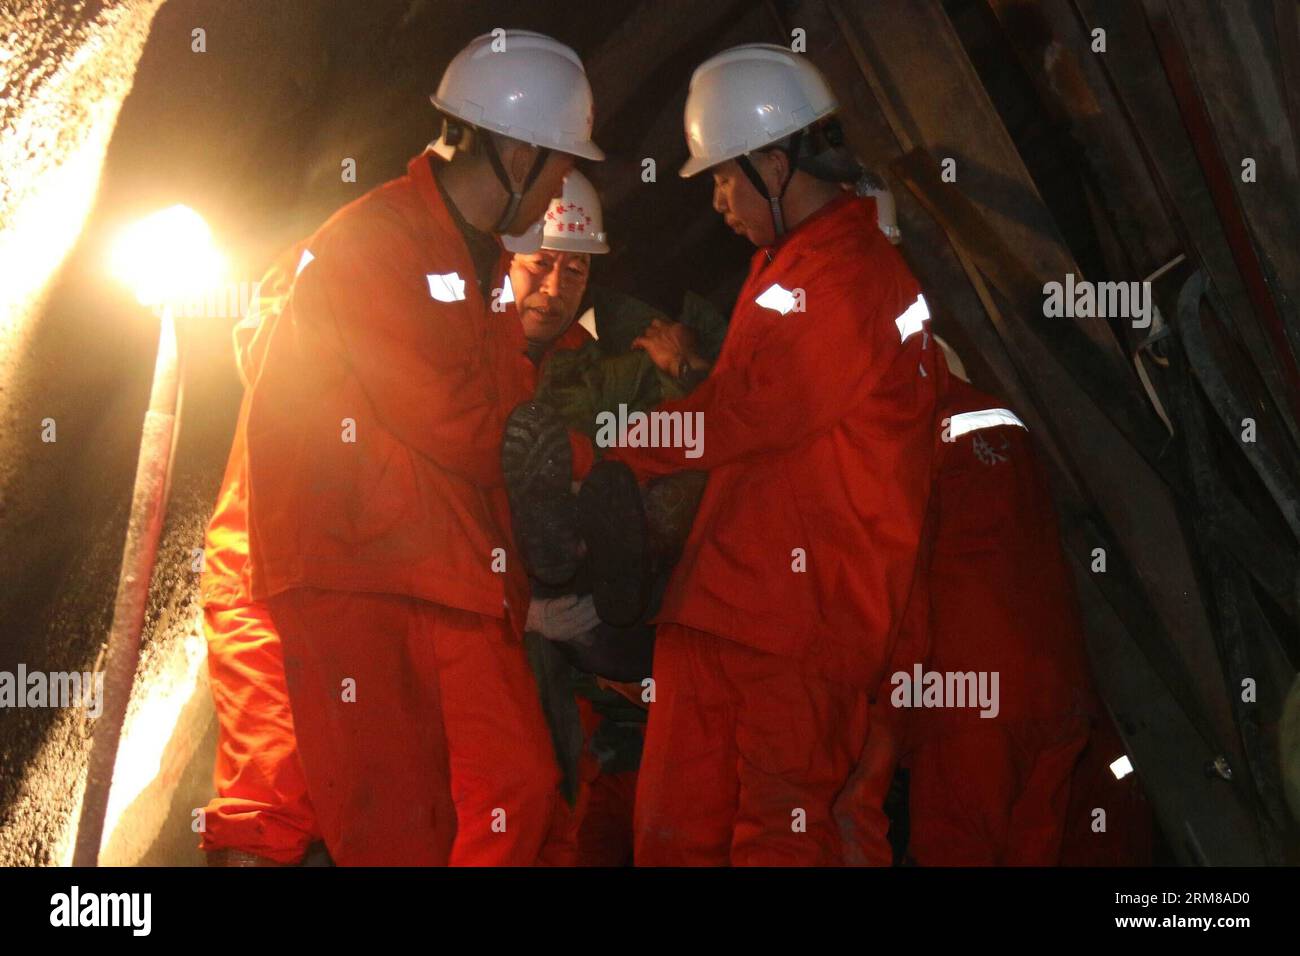 (140405) -- HUNCHUN, April 5, 2014 (Xinhua) -- Rescuers carry a trapped worker out of a collapsed railway tunnel in Hunchun, northeast China s Jilin Province, April 5, 2014. A tunnel of the Jilin-Hunchun High-Speed Railway, which is under construction, collapsed at around 2:00 a.m. Wednesday, leaving 12 workers trapped. All of the 12 workers have been rescued by 3:30 p.m. Saturday. (Xinhua/Lin Hong) (wjq) CHINA-JILIN-HUNCHUN-RAILWAY TUNNEL-COLLAPSE-RESCUE (CN) PUBLICATIONxNOTxINxCHN   Hunchun April 5 2014 XINHUA Rescue Carry a Trapped Worker out of a Collapsed Railway Tunnel in Hunchun Northea Stock Photo